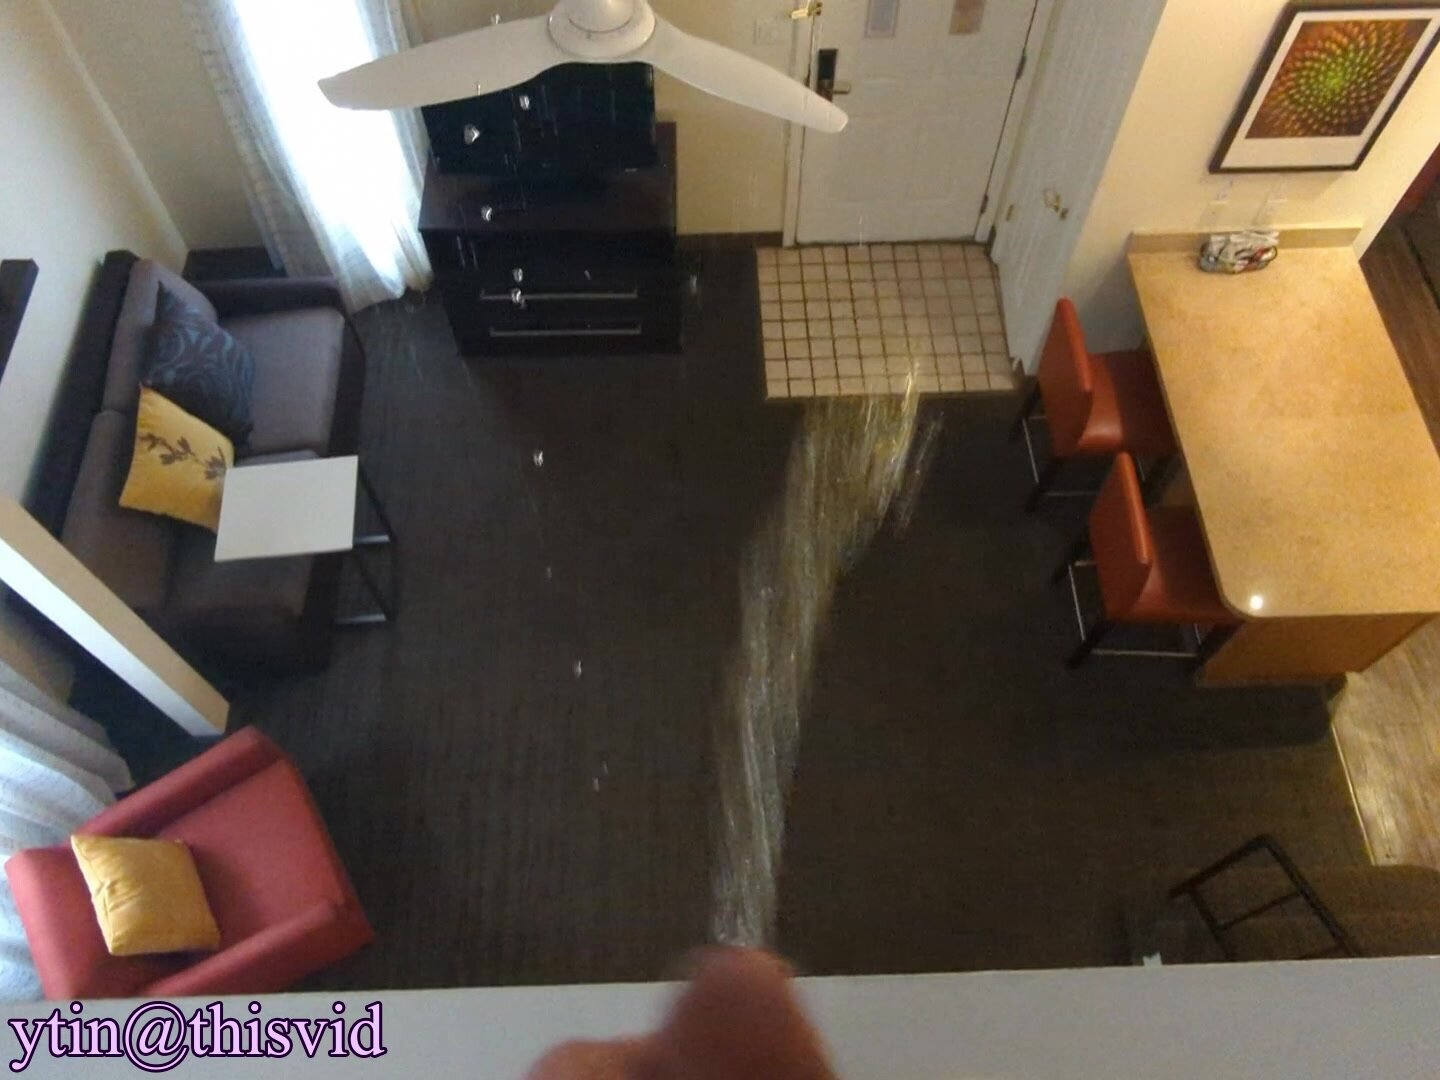 Hotel Piss From Loft on Floor, Ceiling, and TV